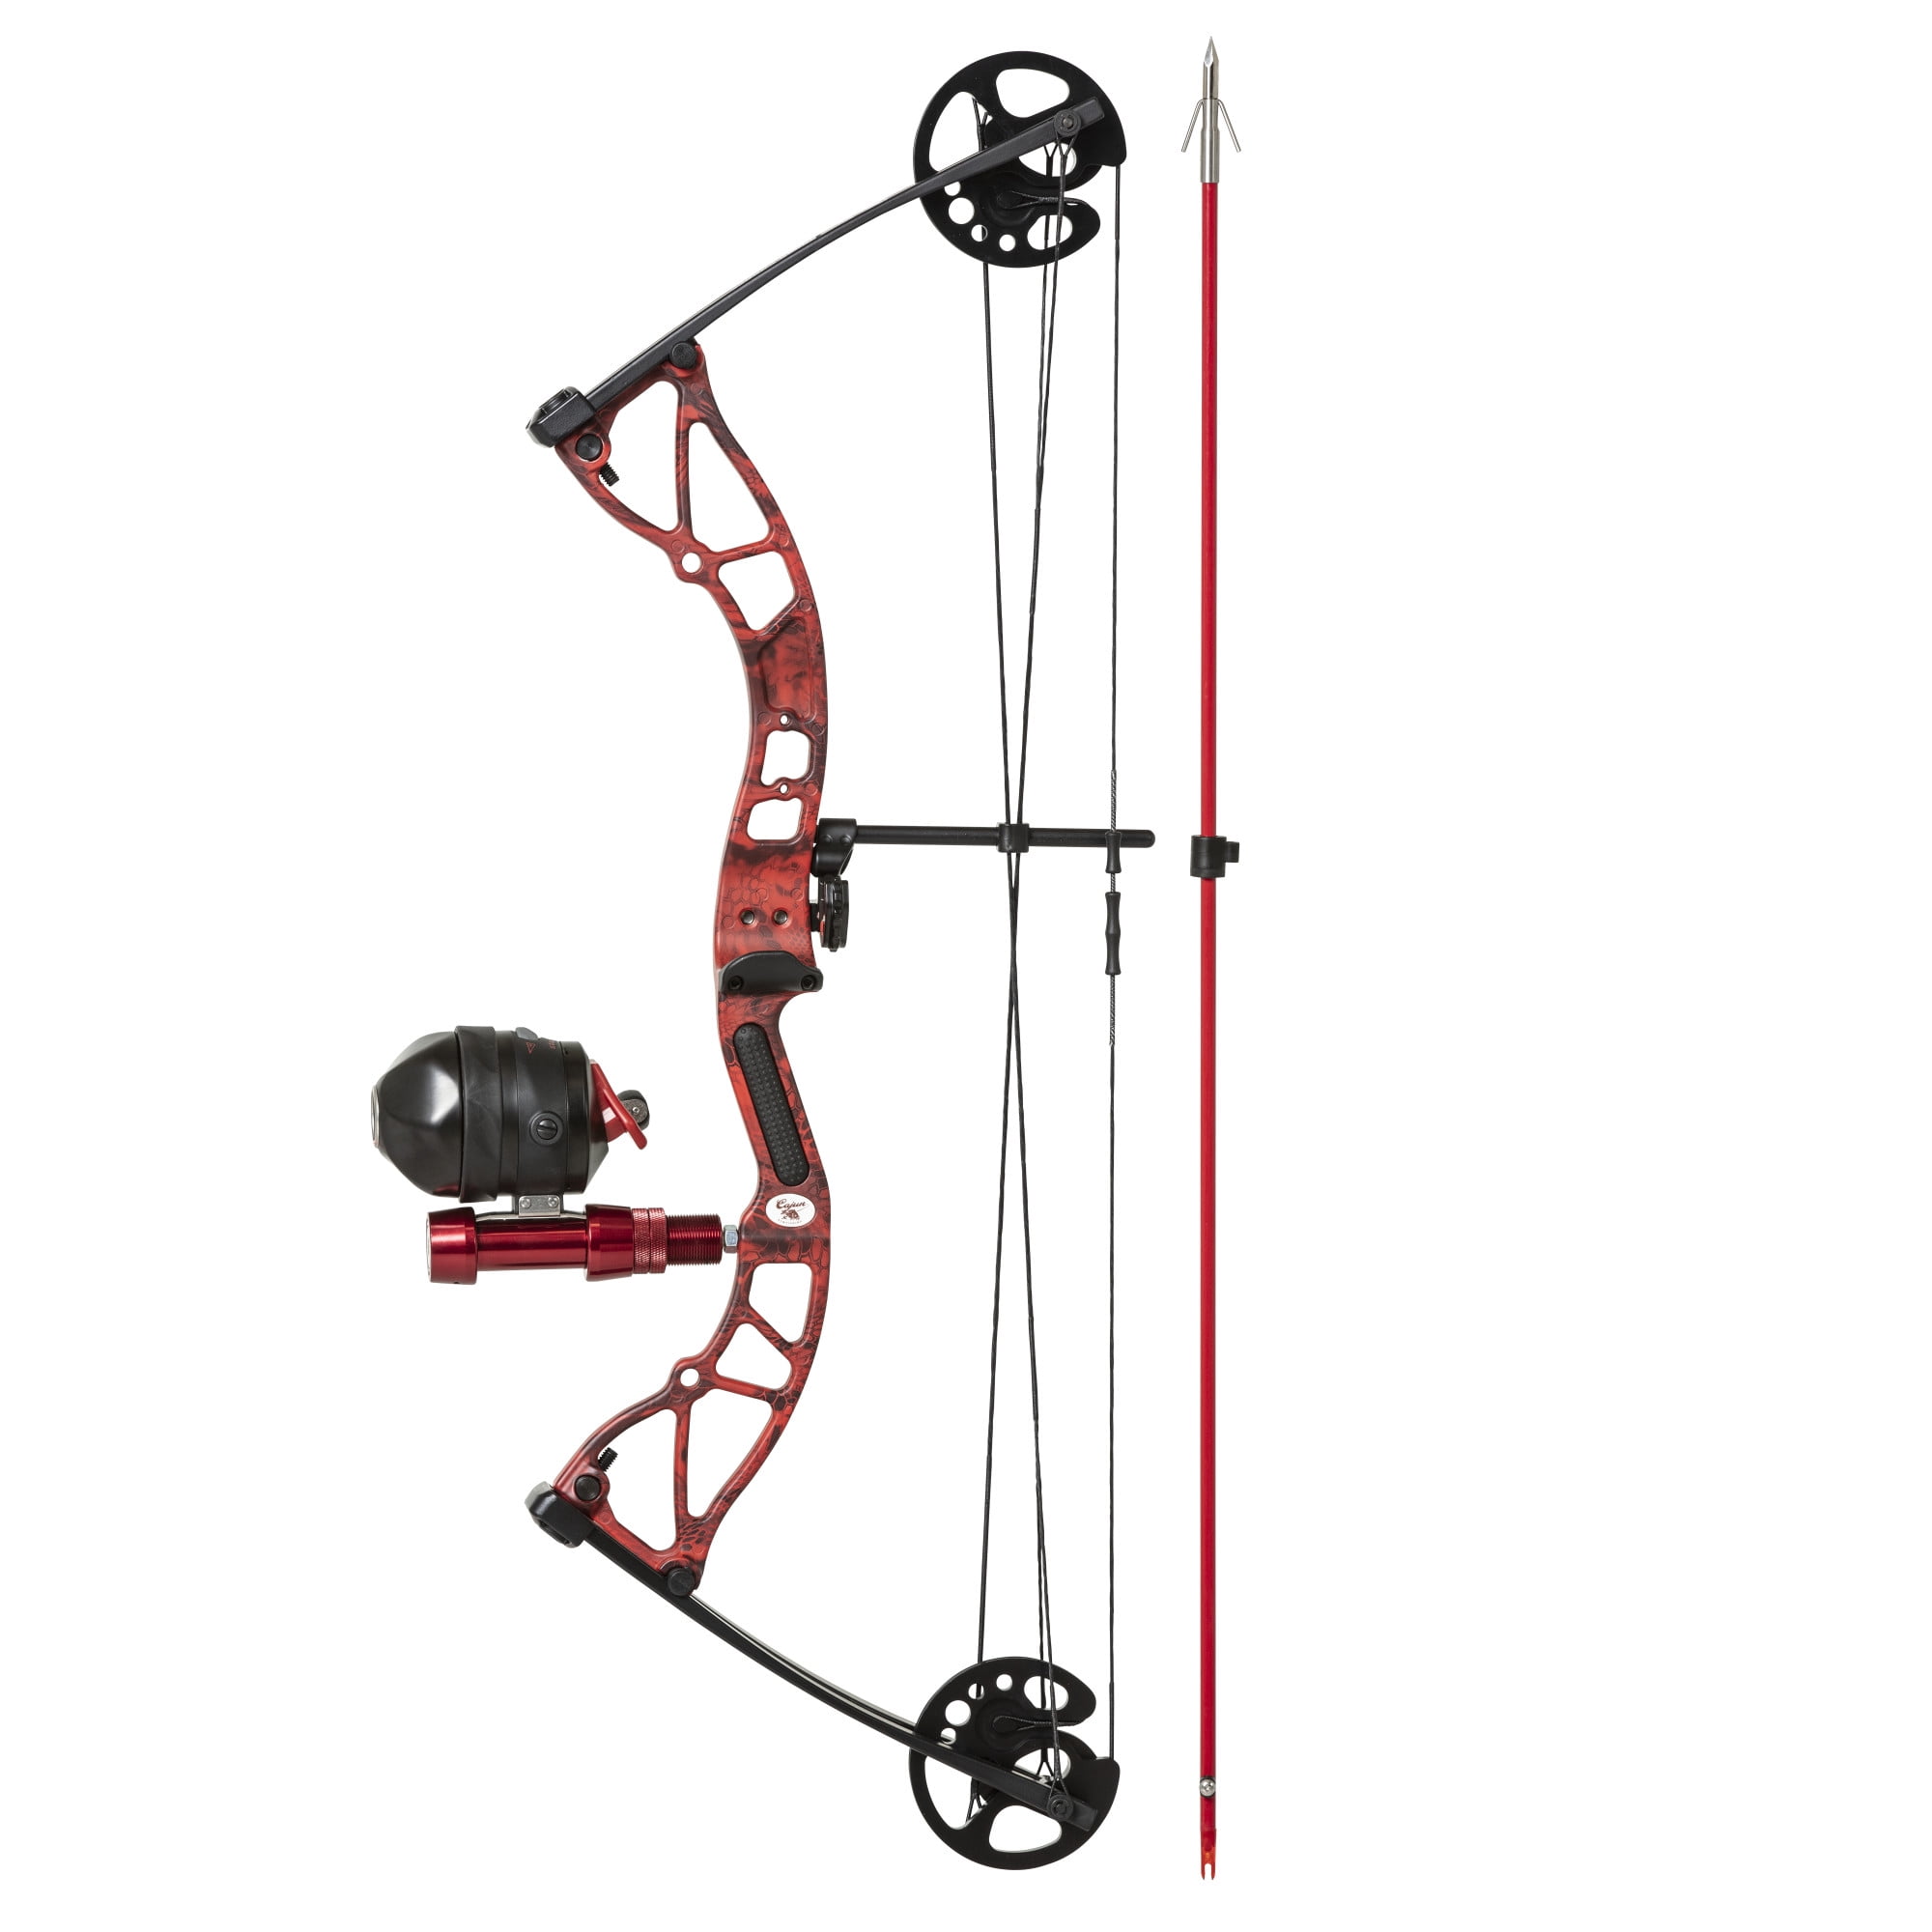 Cajun Bowfishing Shore Runner Compound Bowfishing Bow Ready to Fish Kit  with Arrow Rest, Bowfishing Reel, Reel Seat, Blister Buster Finger Pads,  Fiberglass Arrow 